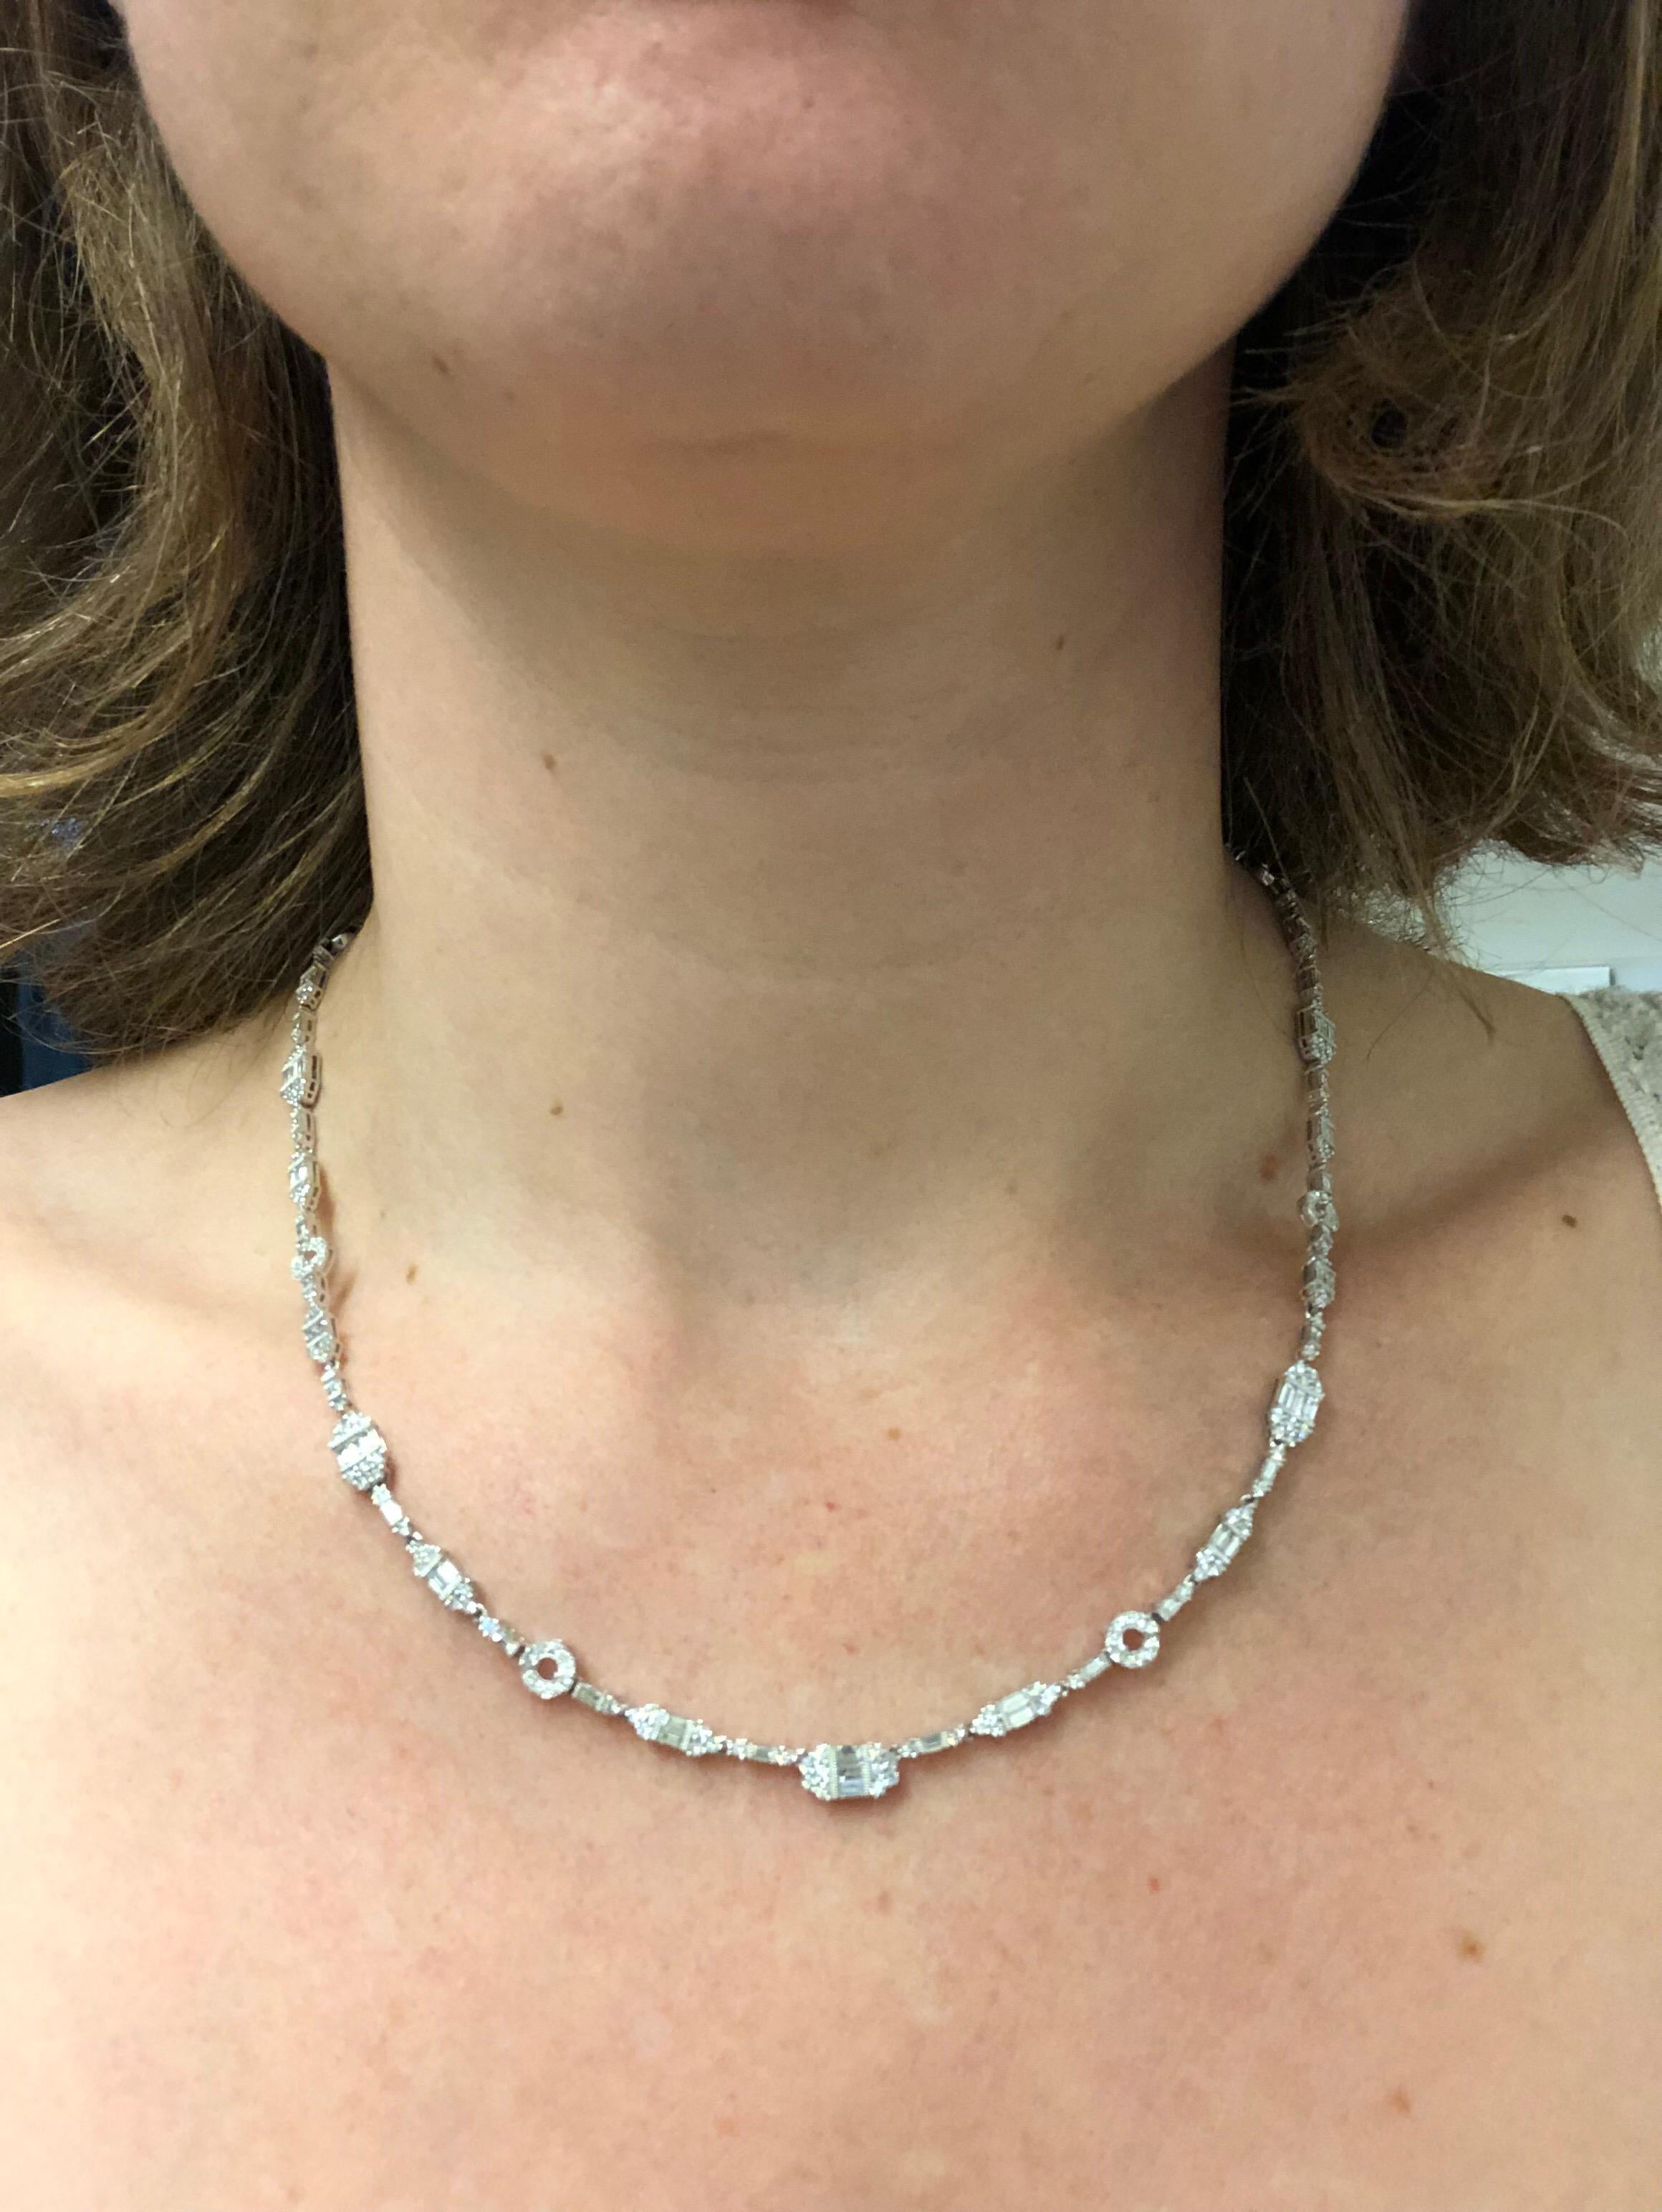 Women's Jye’s White Gold Necklace of Baguette and Round Diamonds